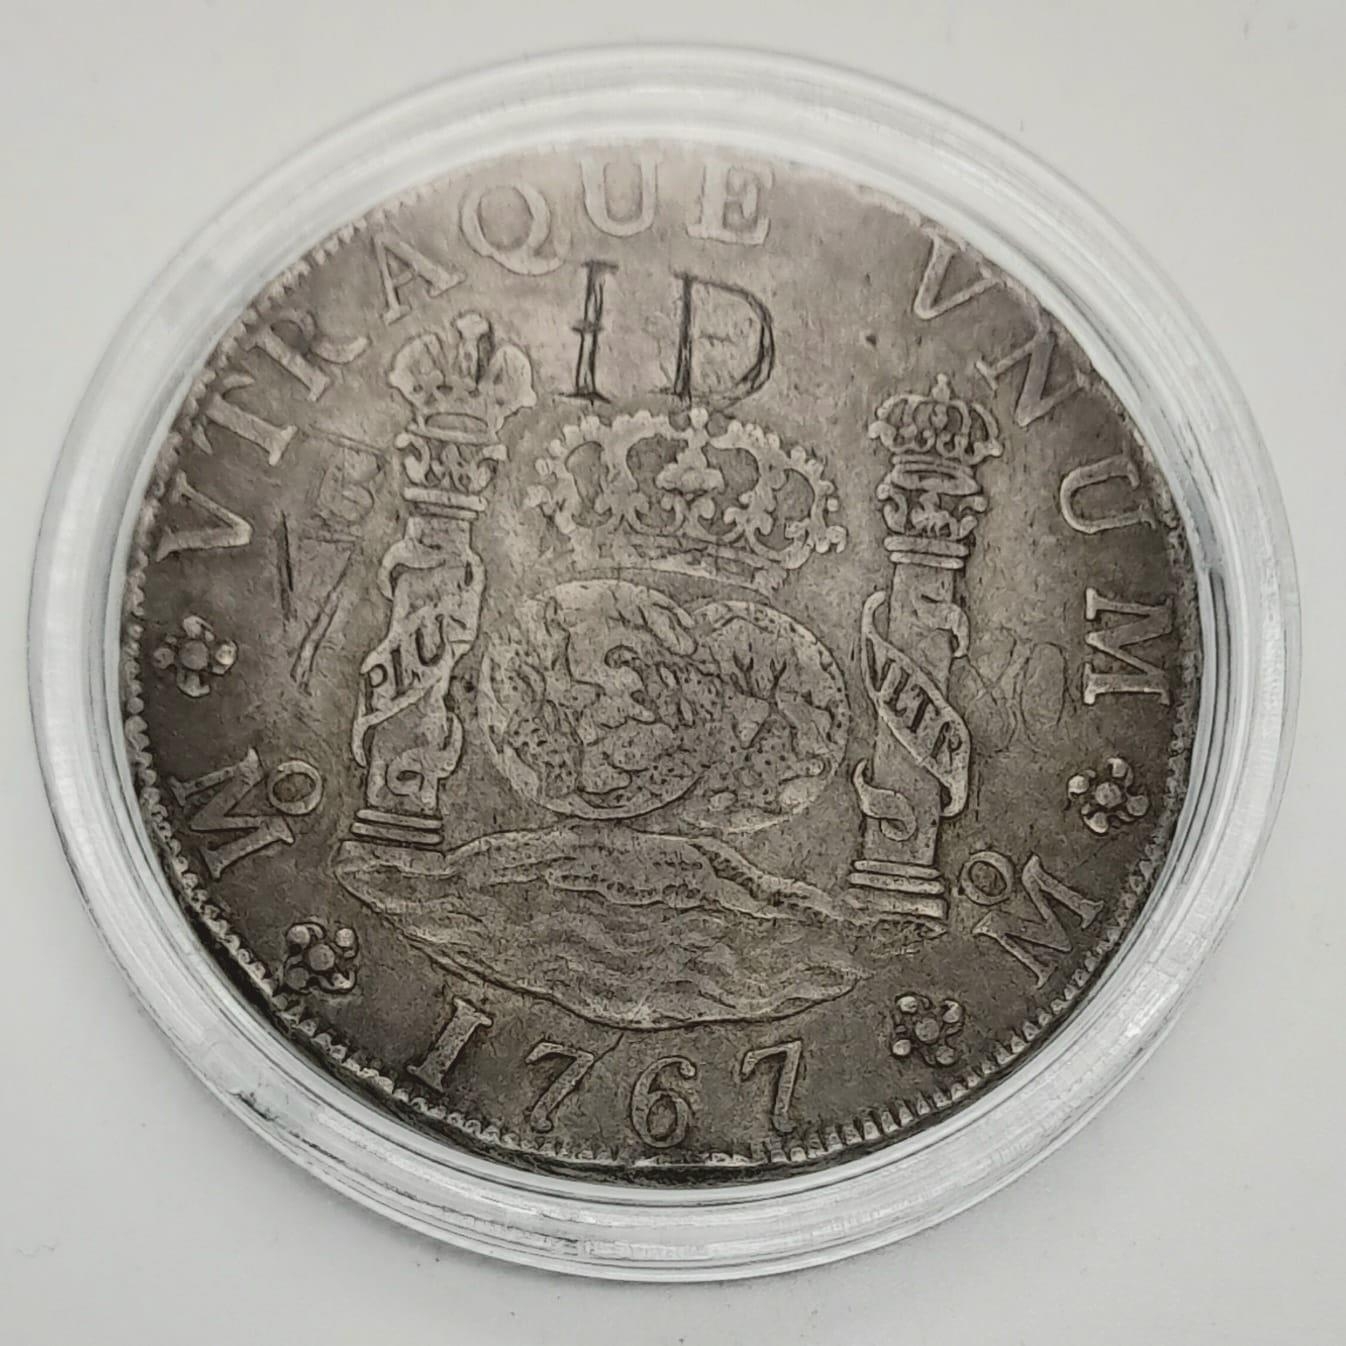 A Silver 1767 Mexican Pillar Dollar Coin with Graffiti. Please see photos for overall conditions.